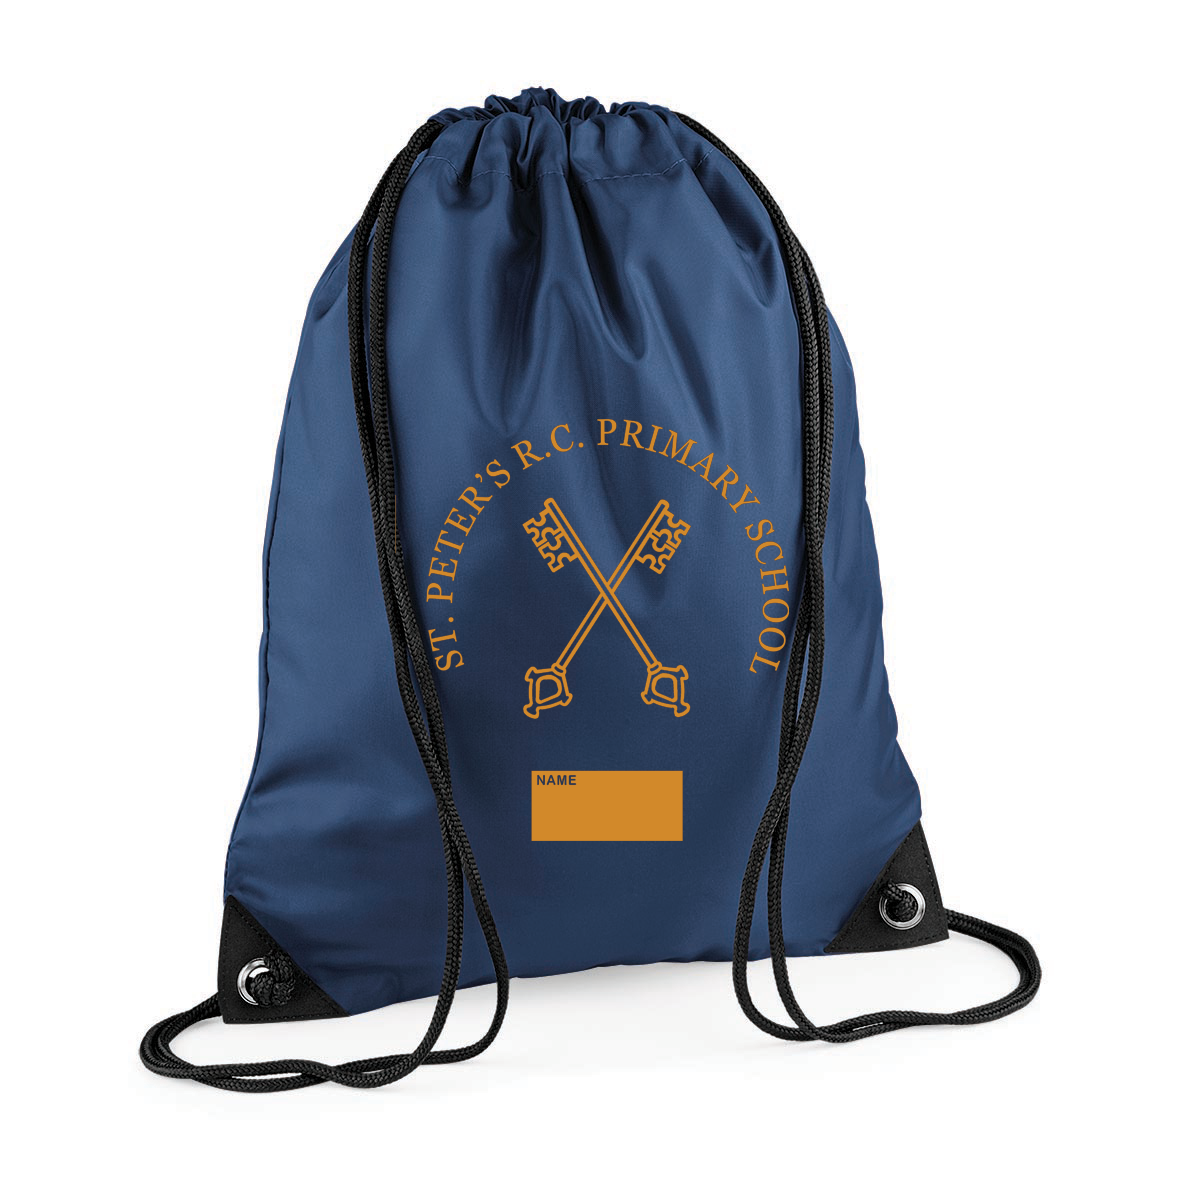 St Peter's (35040) Navy Gym Bag with Logo (2718) - Lynendo Trade Store